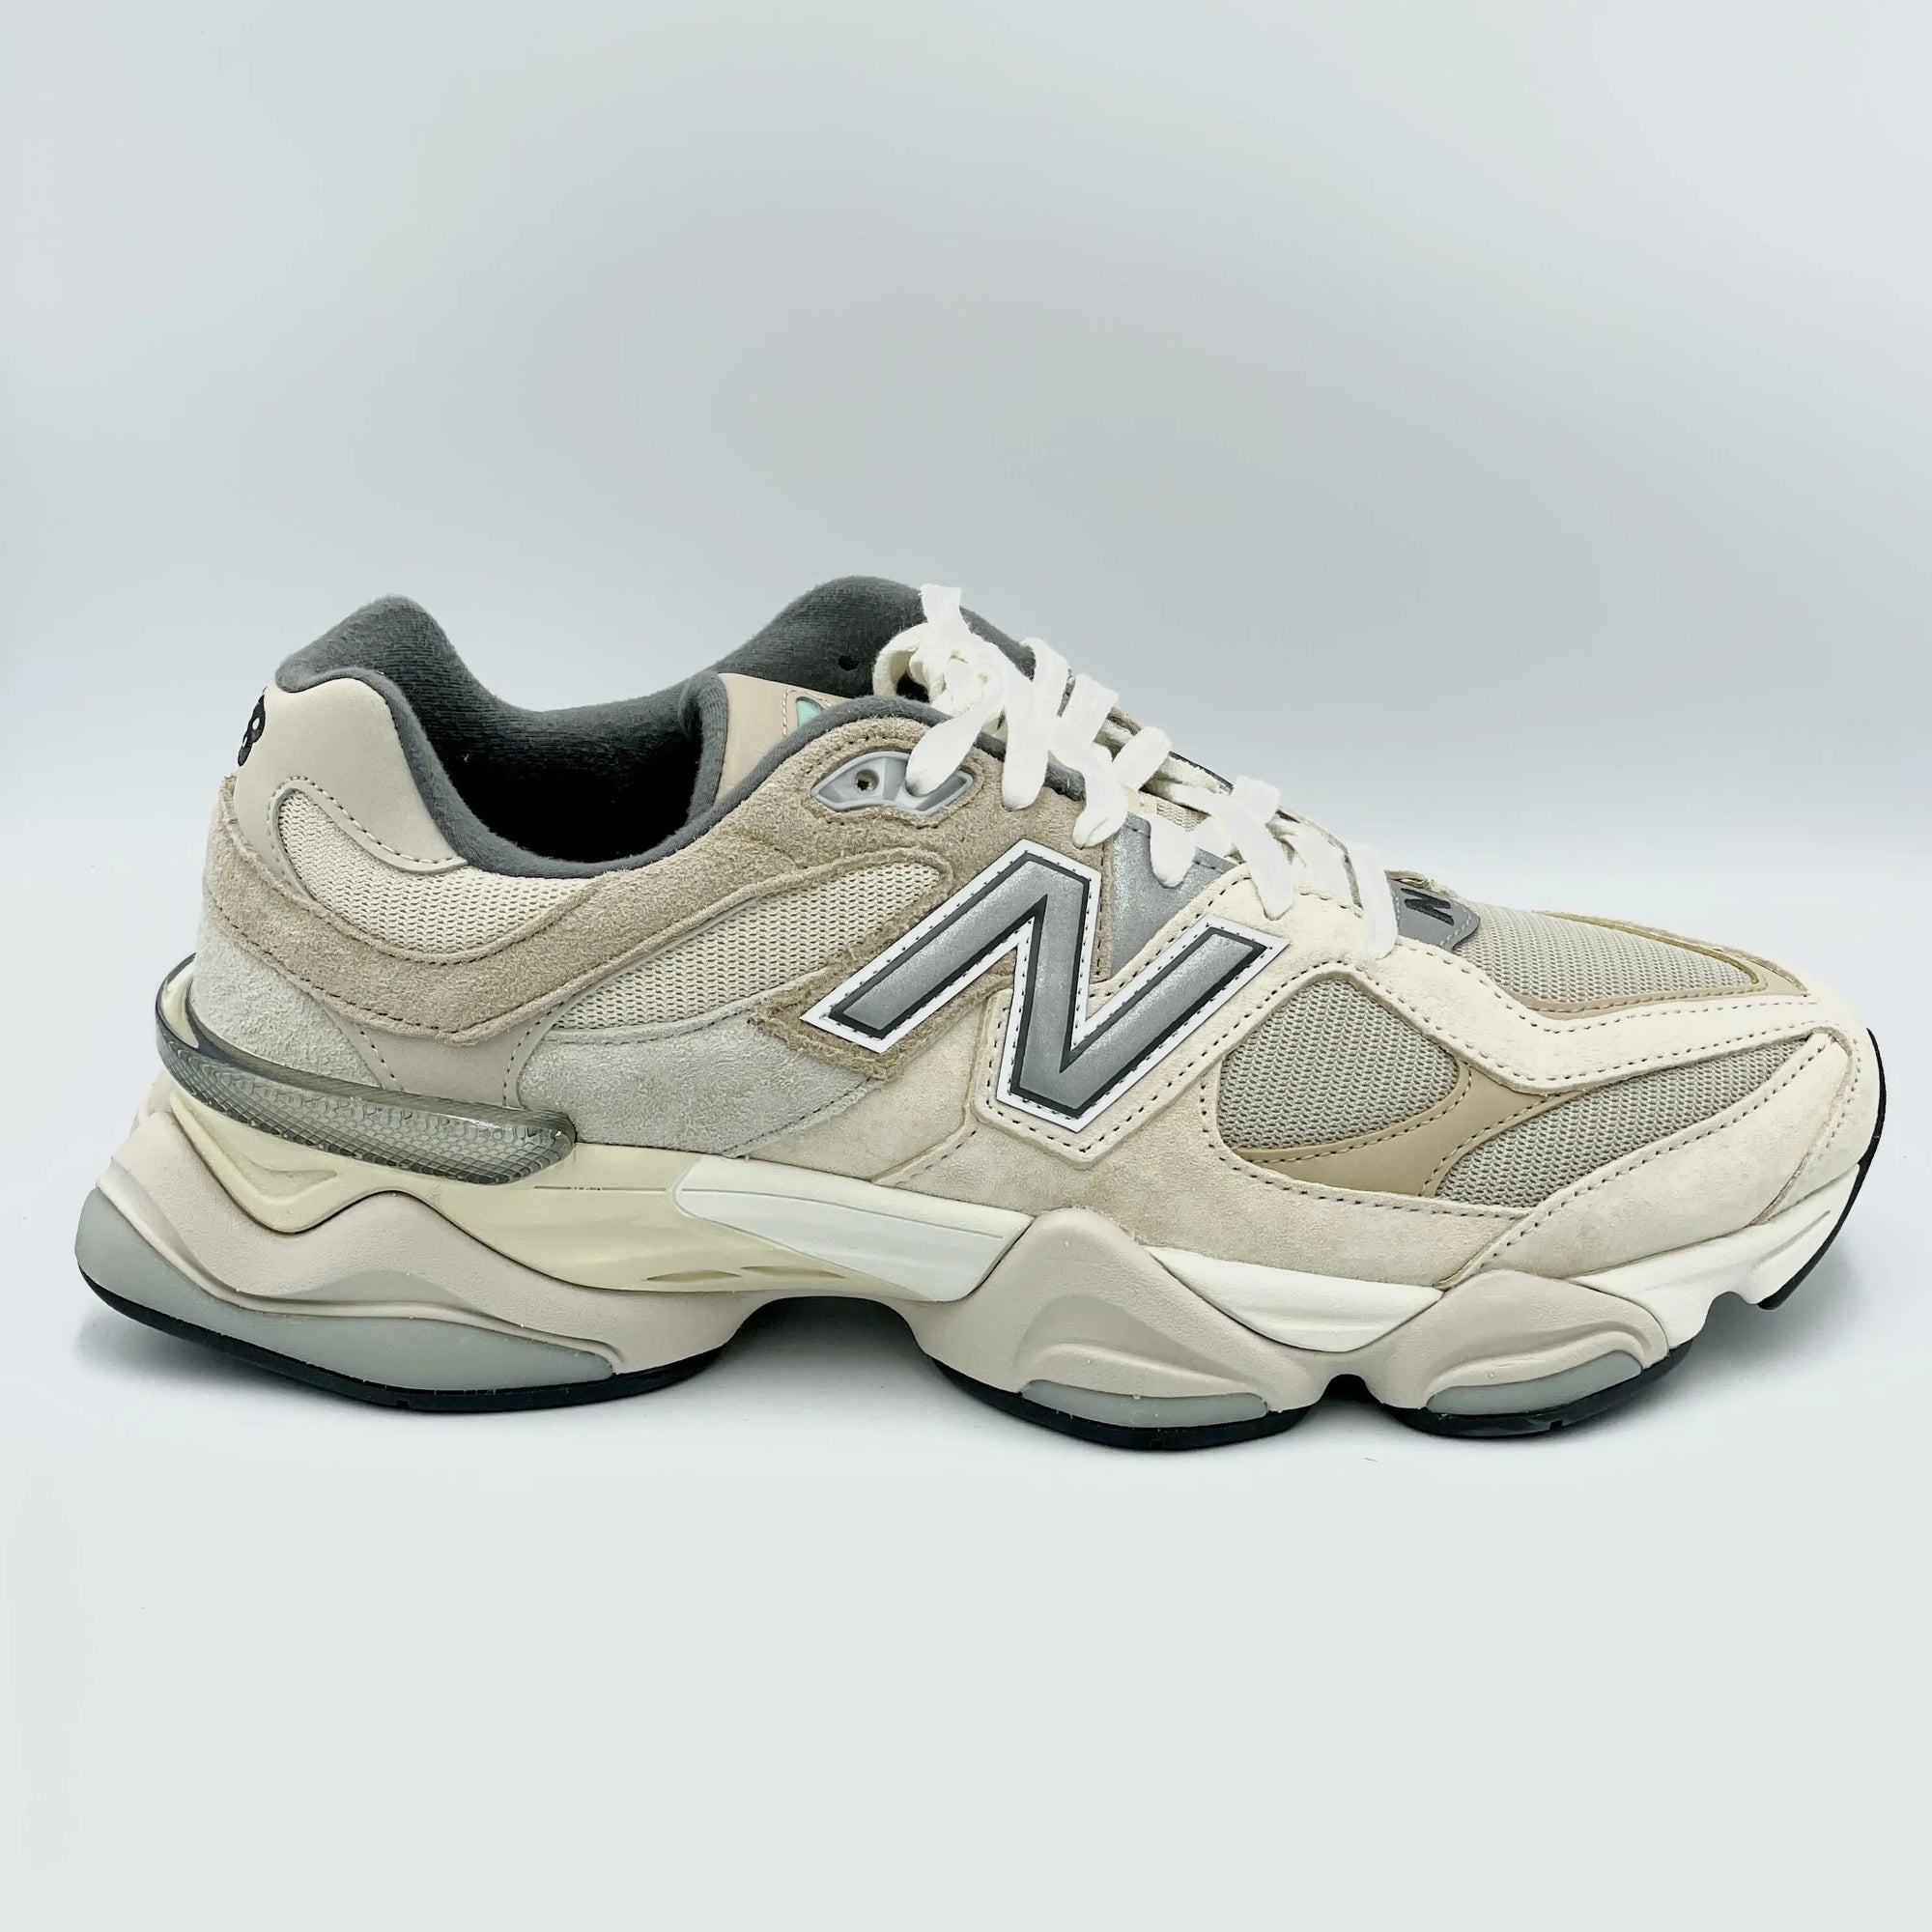 shop the new balance 9060 in a beige colorway right now